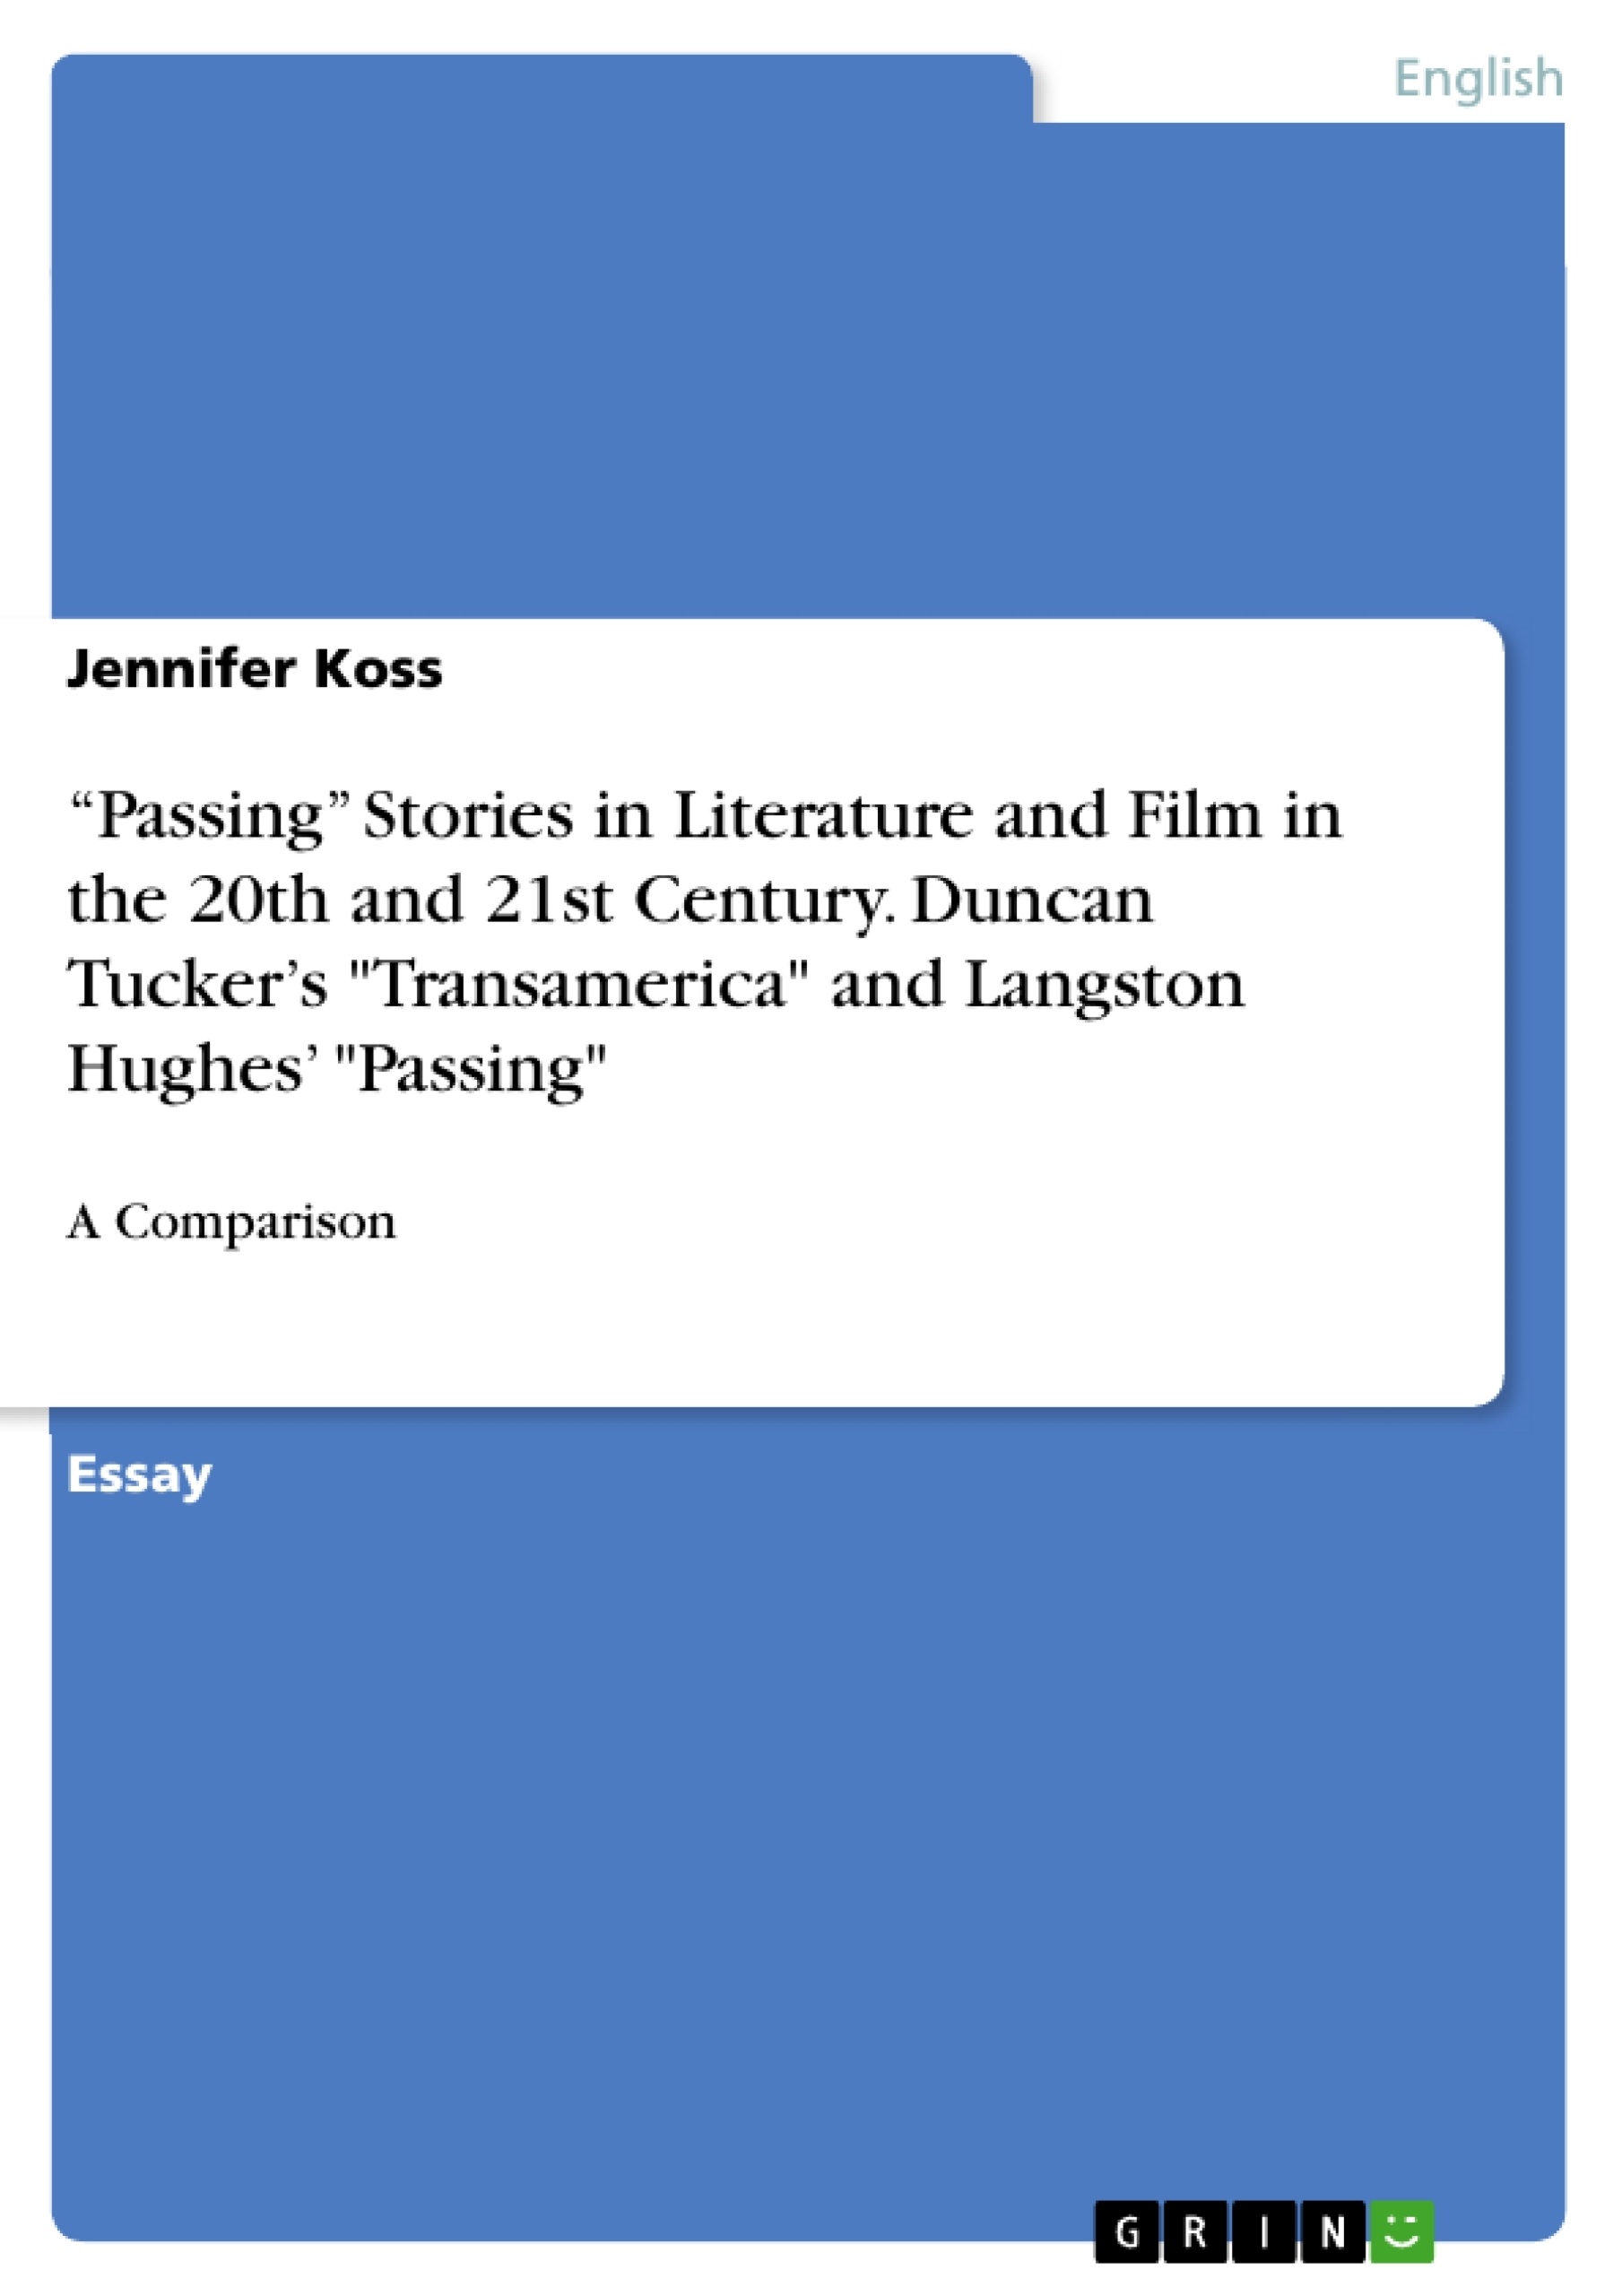 Title: “Passing” Stories in Literature and Film in the 20th and 21st Century. Duncan Tucker’s "Transamerica" and Langston Hughes’ "Passing"